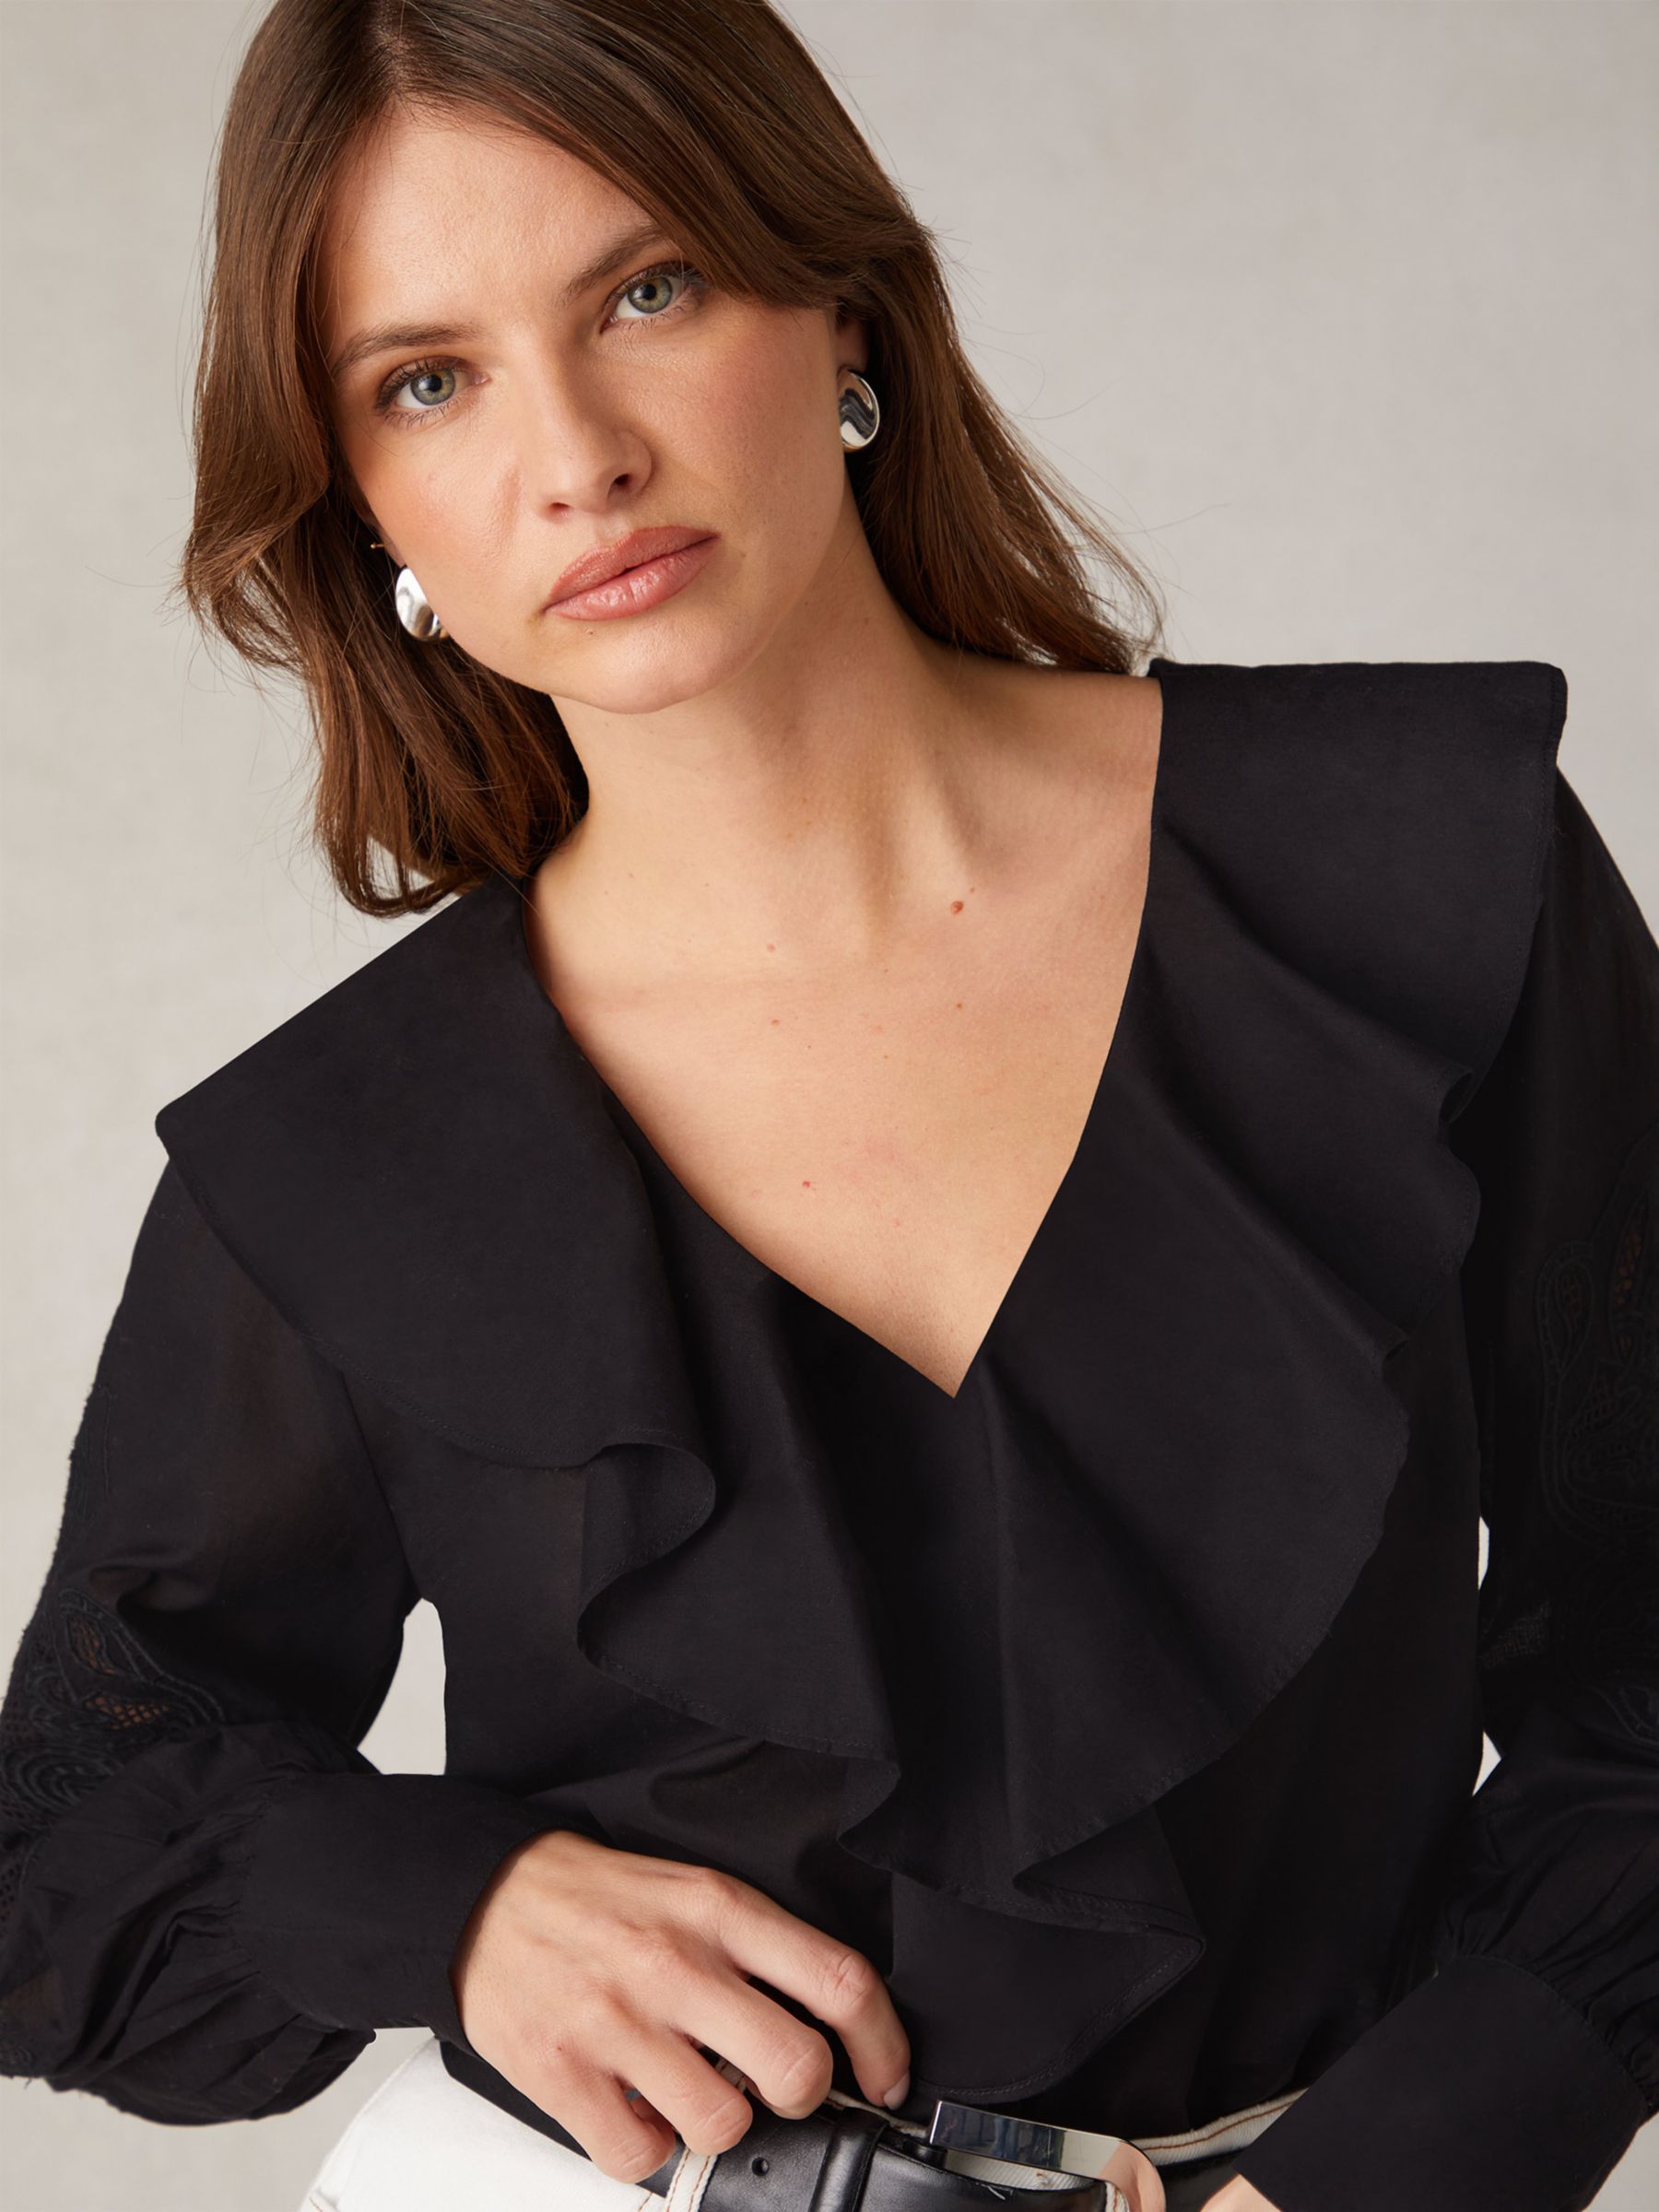 Buy Ro&Zo Embroidery Mesh Sleeve Blouse, Black Online at johnlewis.com